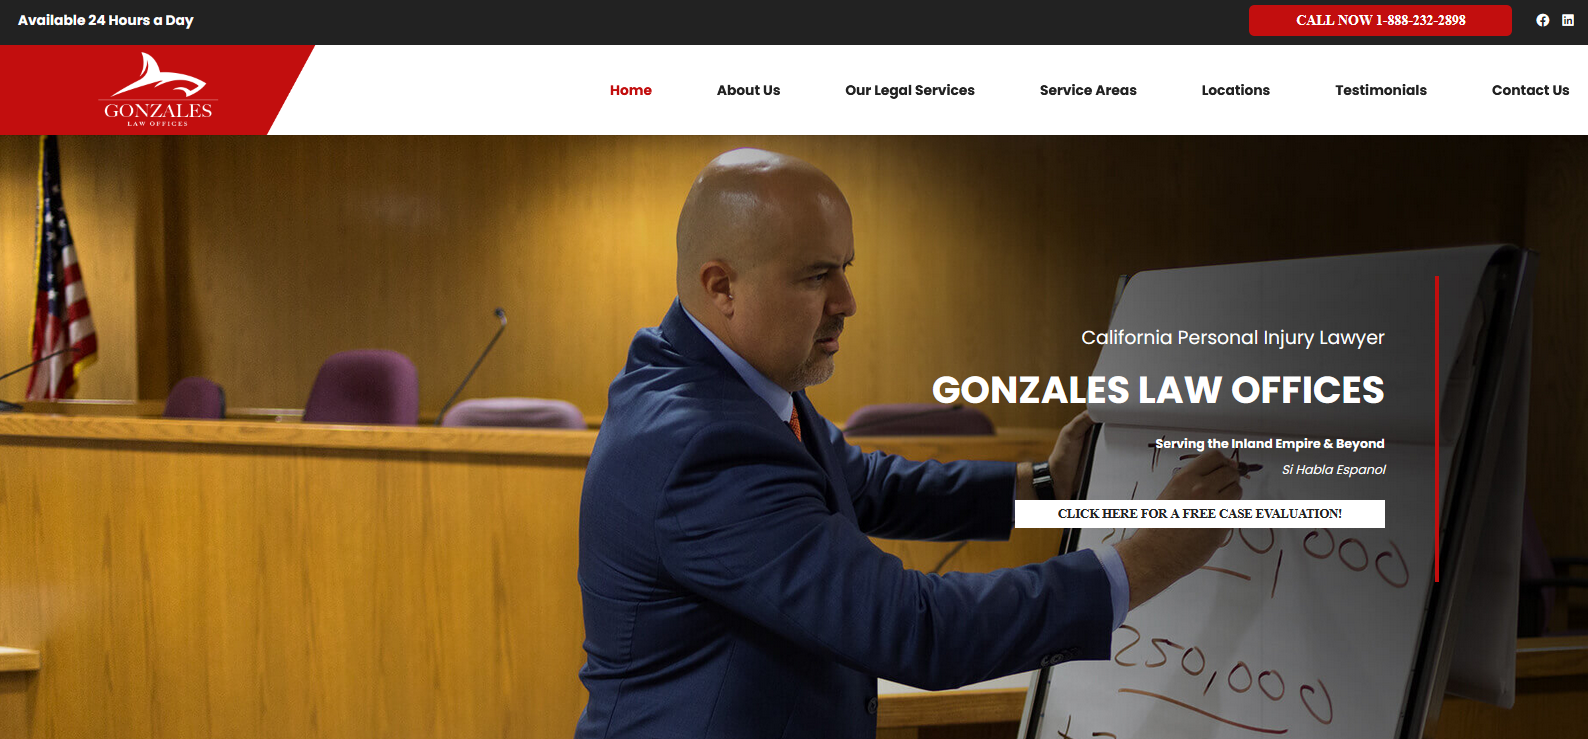 Gonzales Law Offices 1